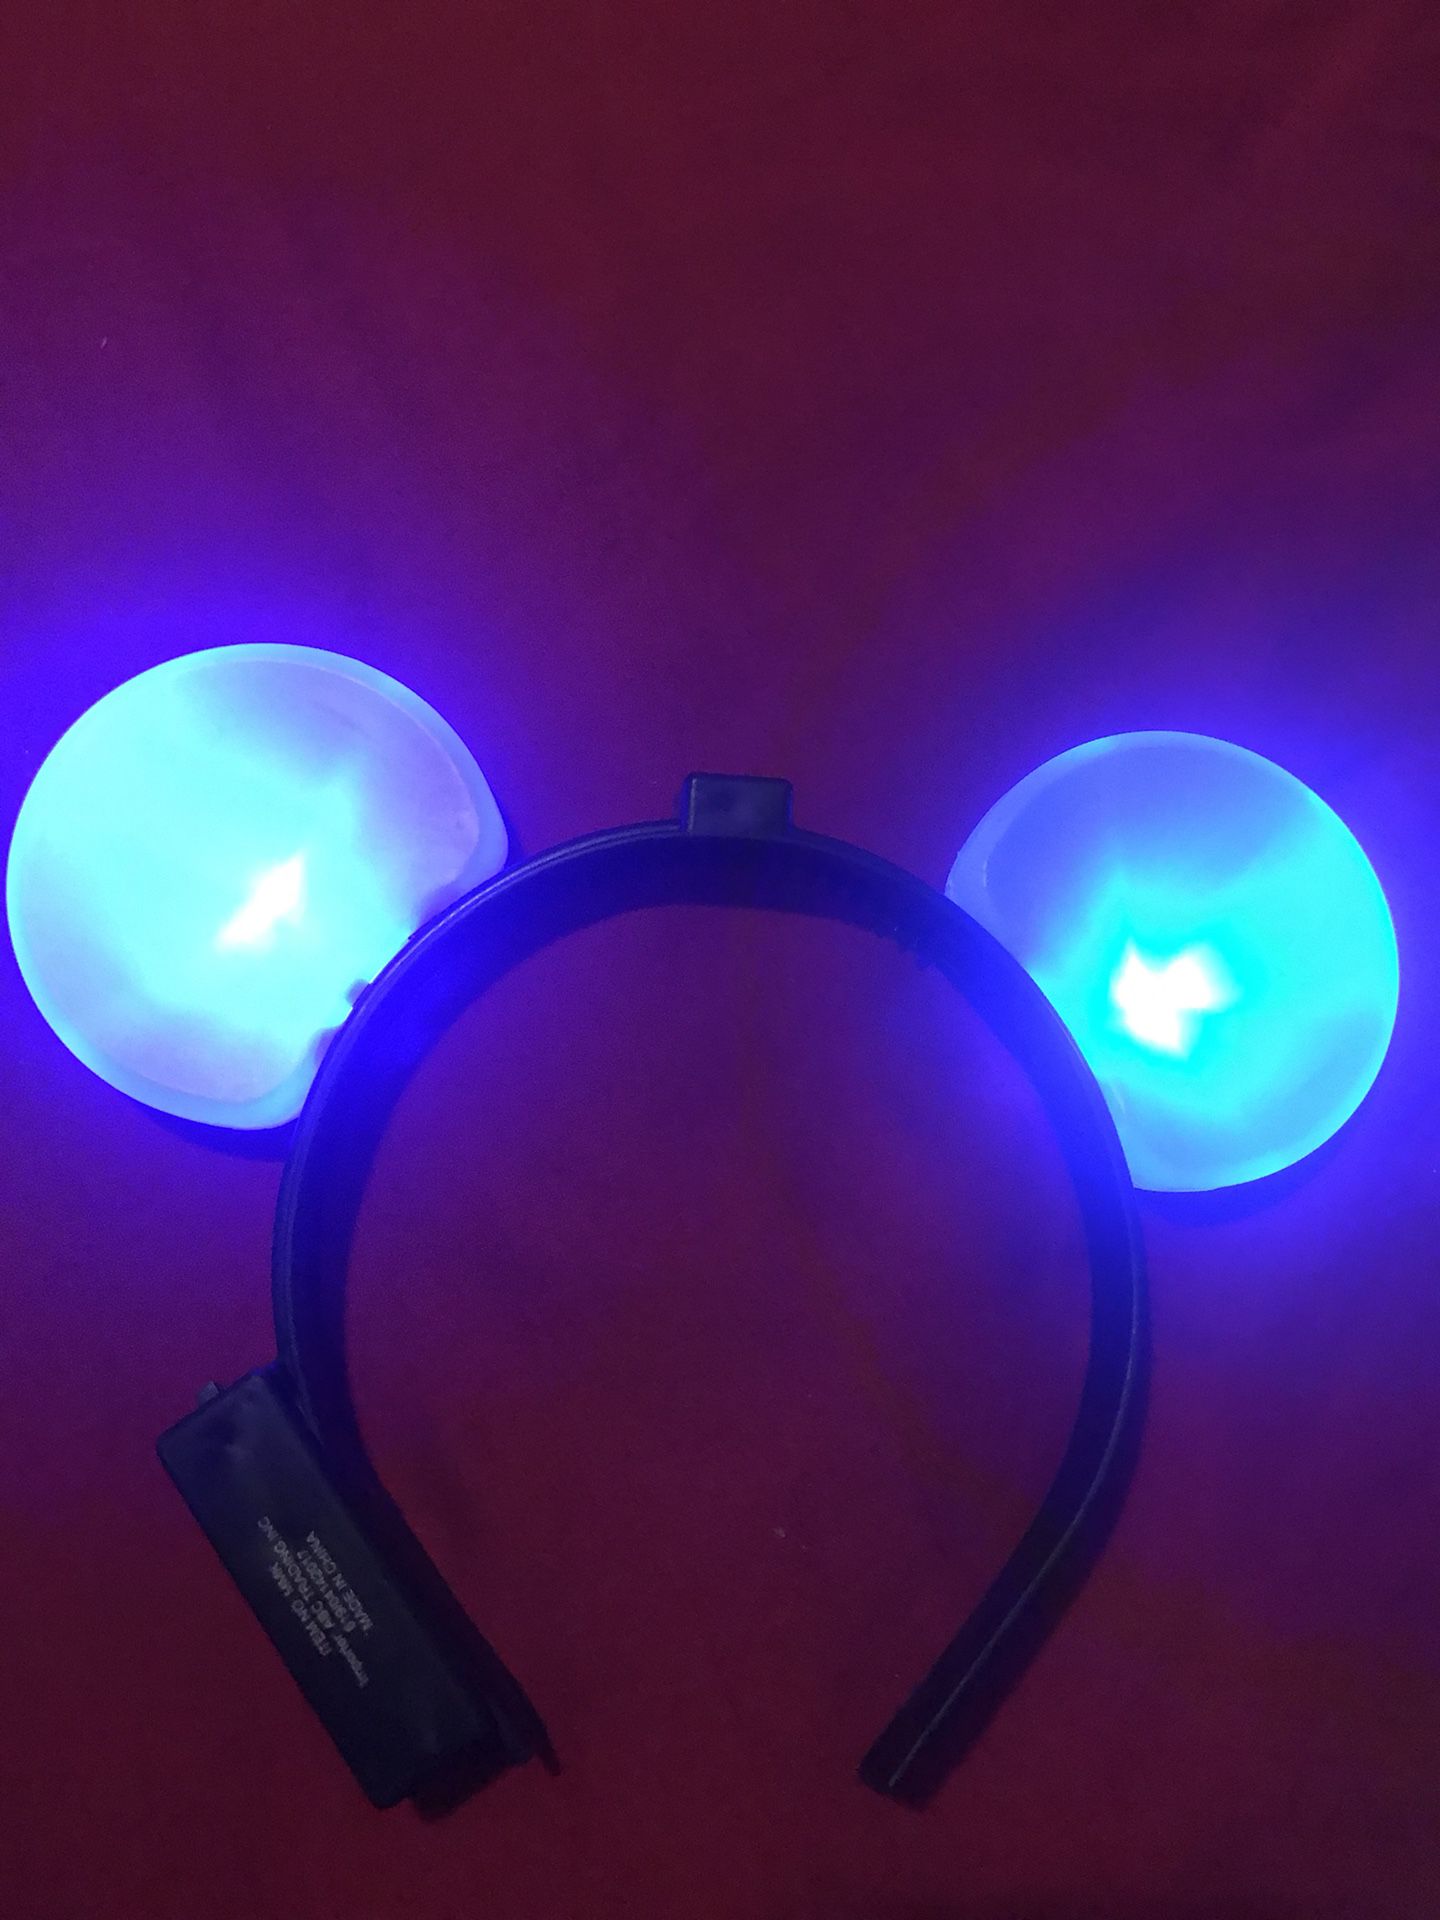 Mickey mouse ears with led lights